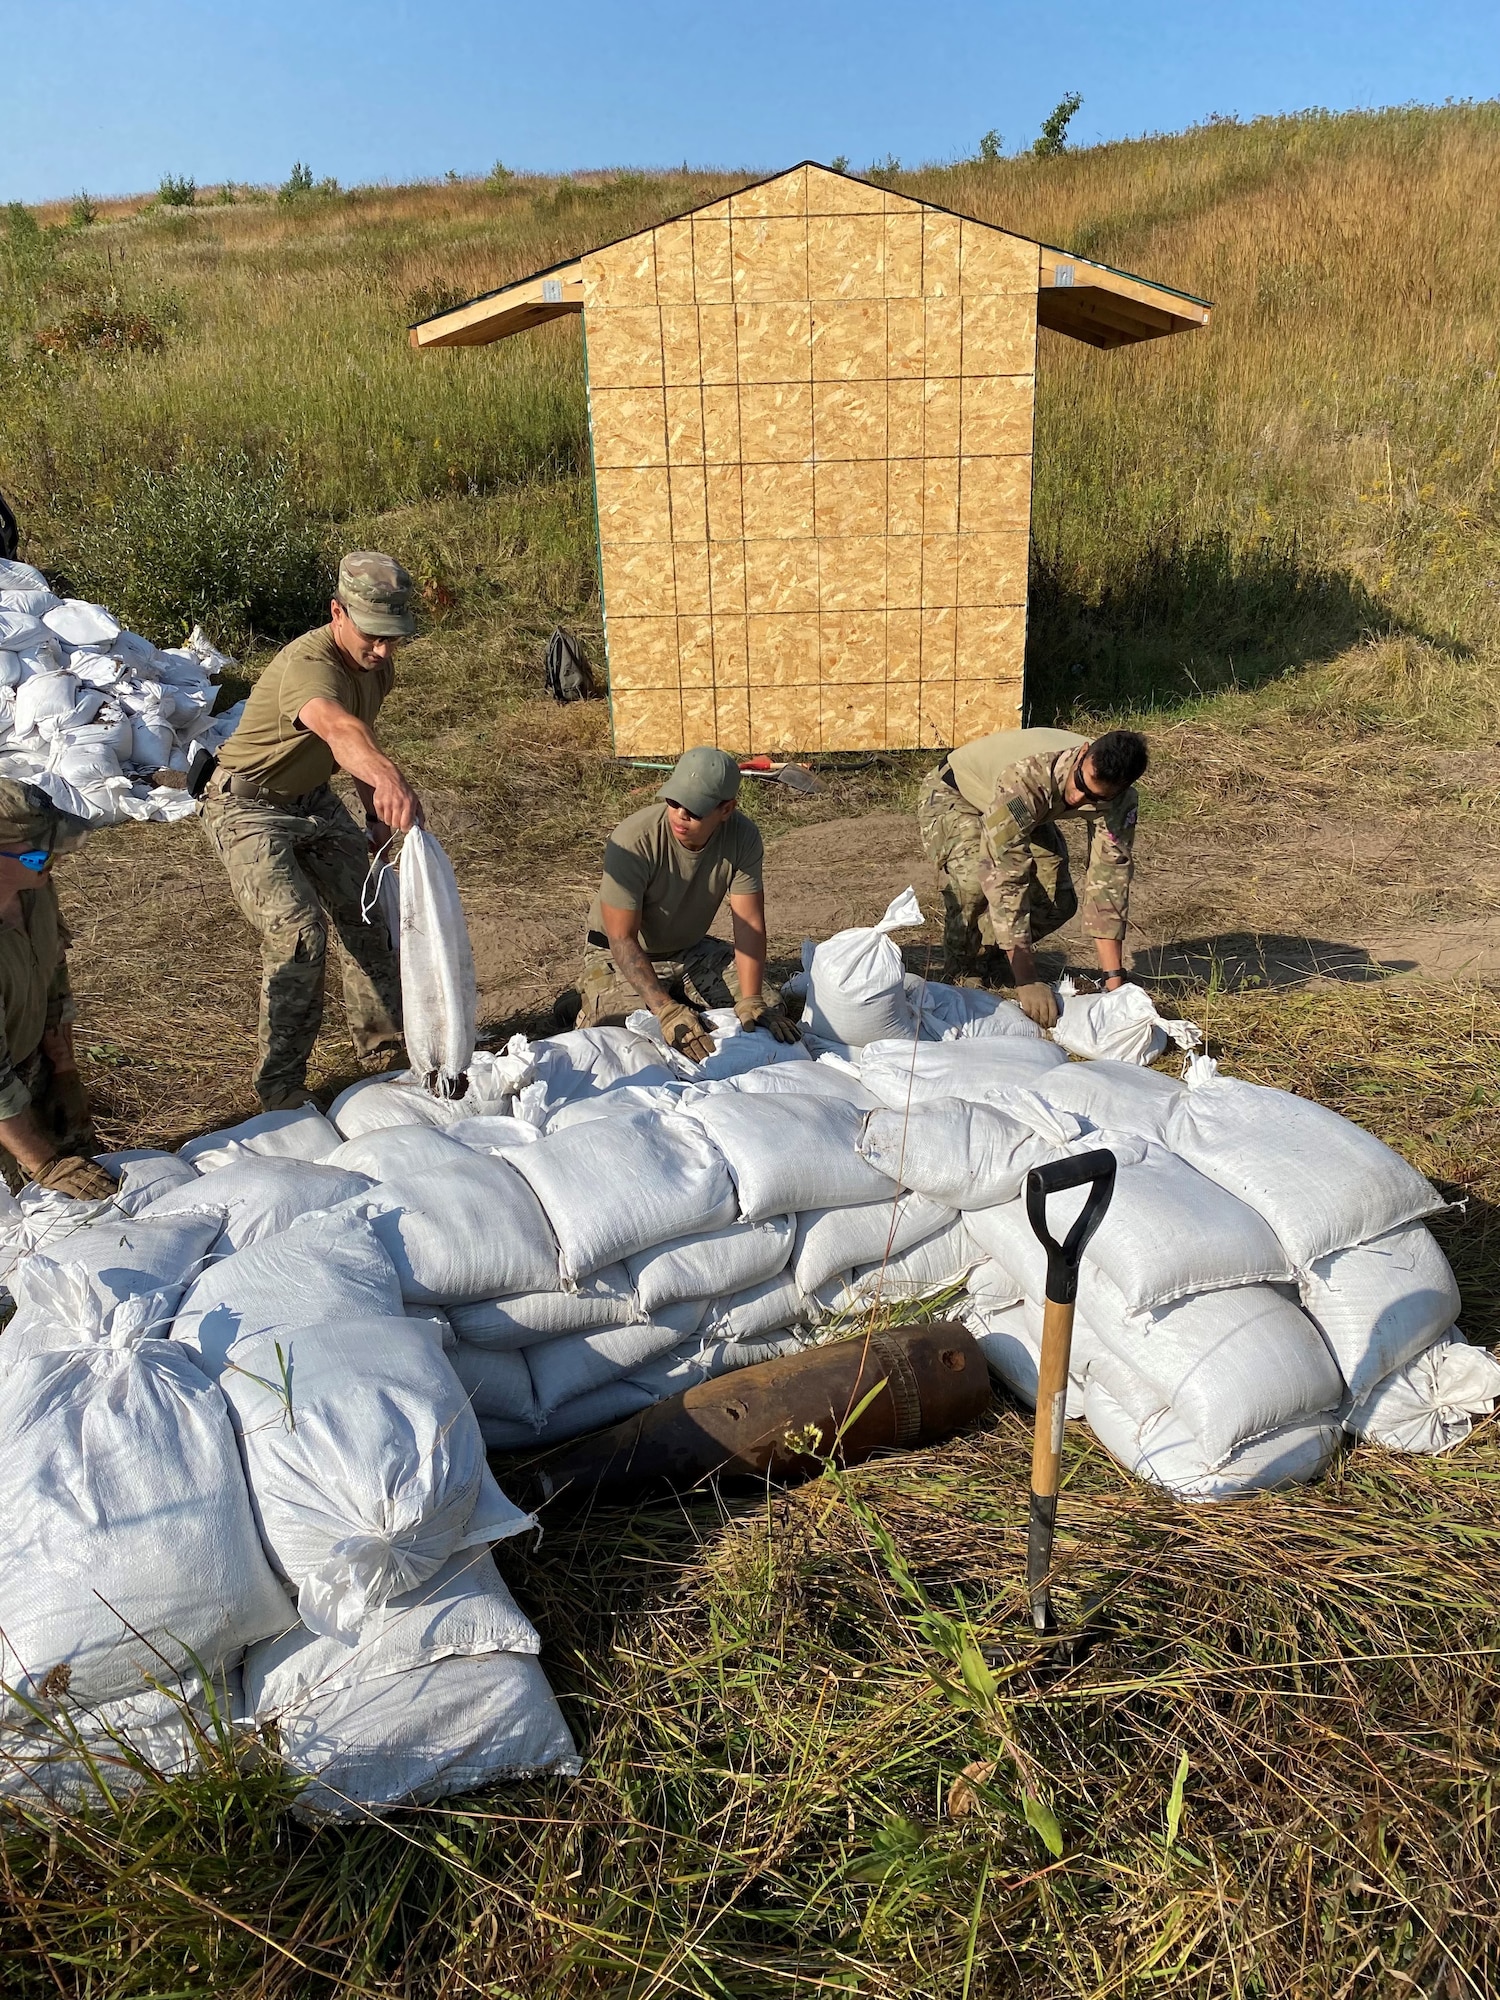 U.S. Air Force and Air National Guard Explosive Ordnance Disposal technicians use sandbag mitigation techniques to protect a nearby structure during the Advanced EOD Conventional Course held at Camp Ripley Training Center September 9-13, 2022.